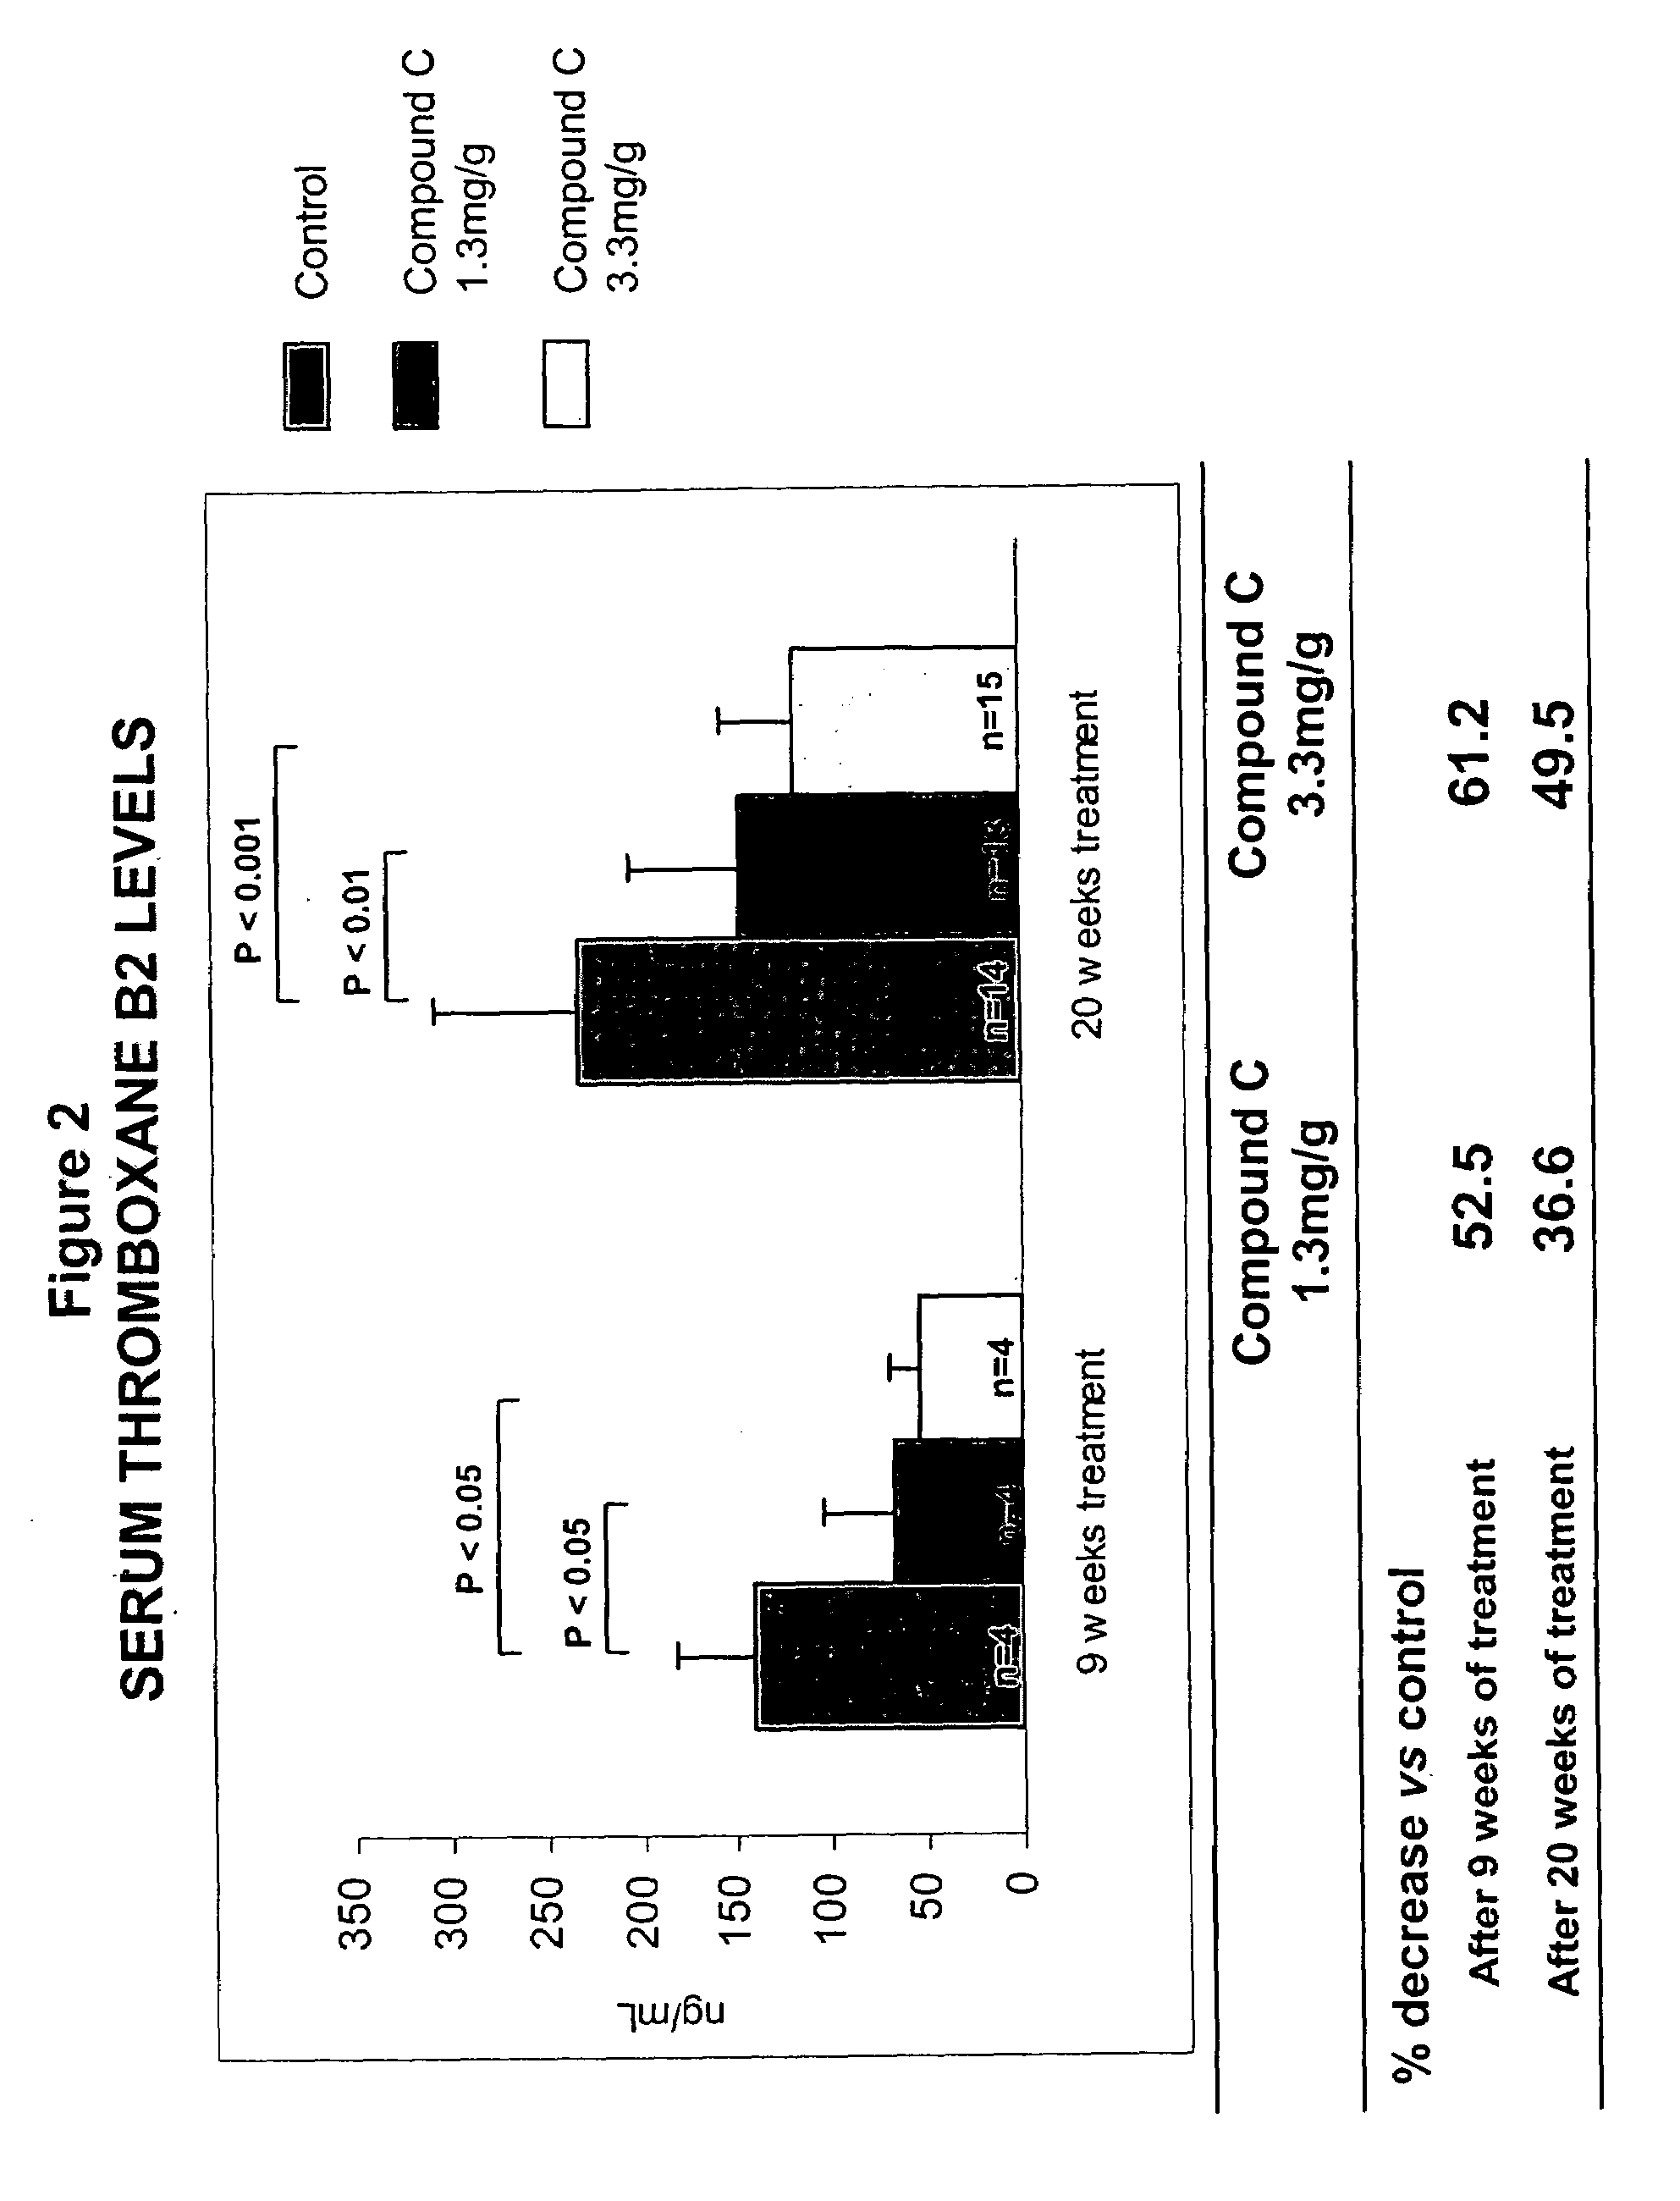 Methods for the use of inhibitors of cytosolic phospholipase A2